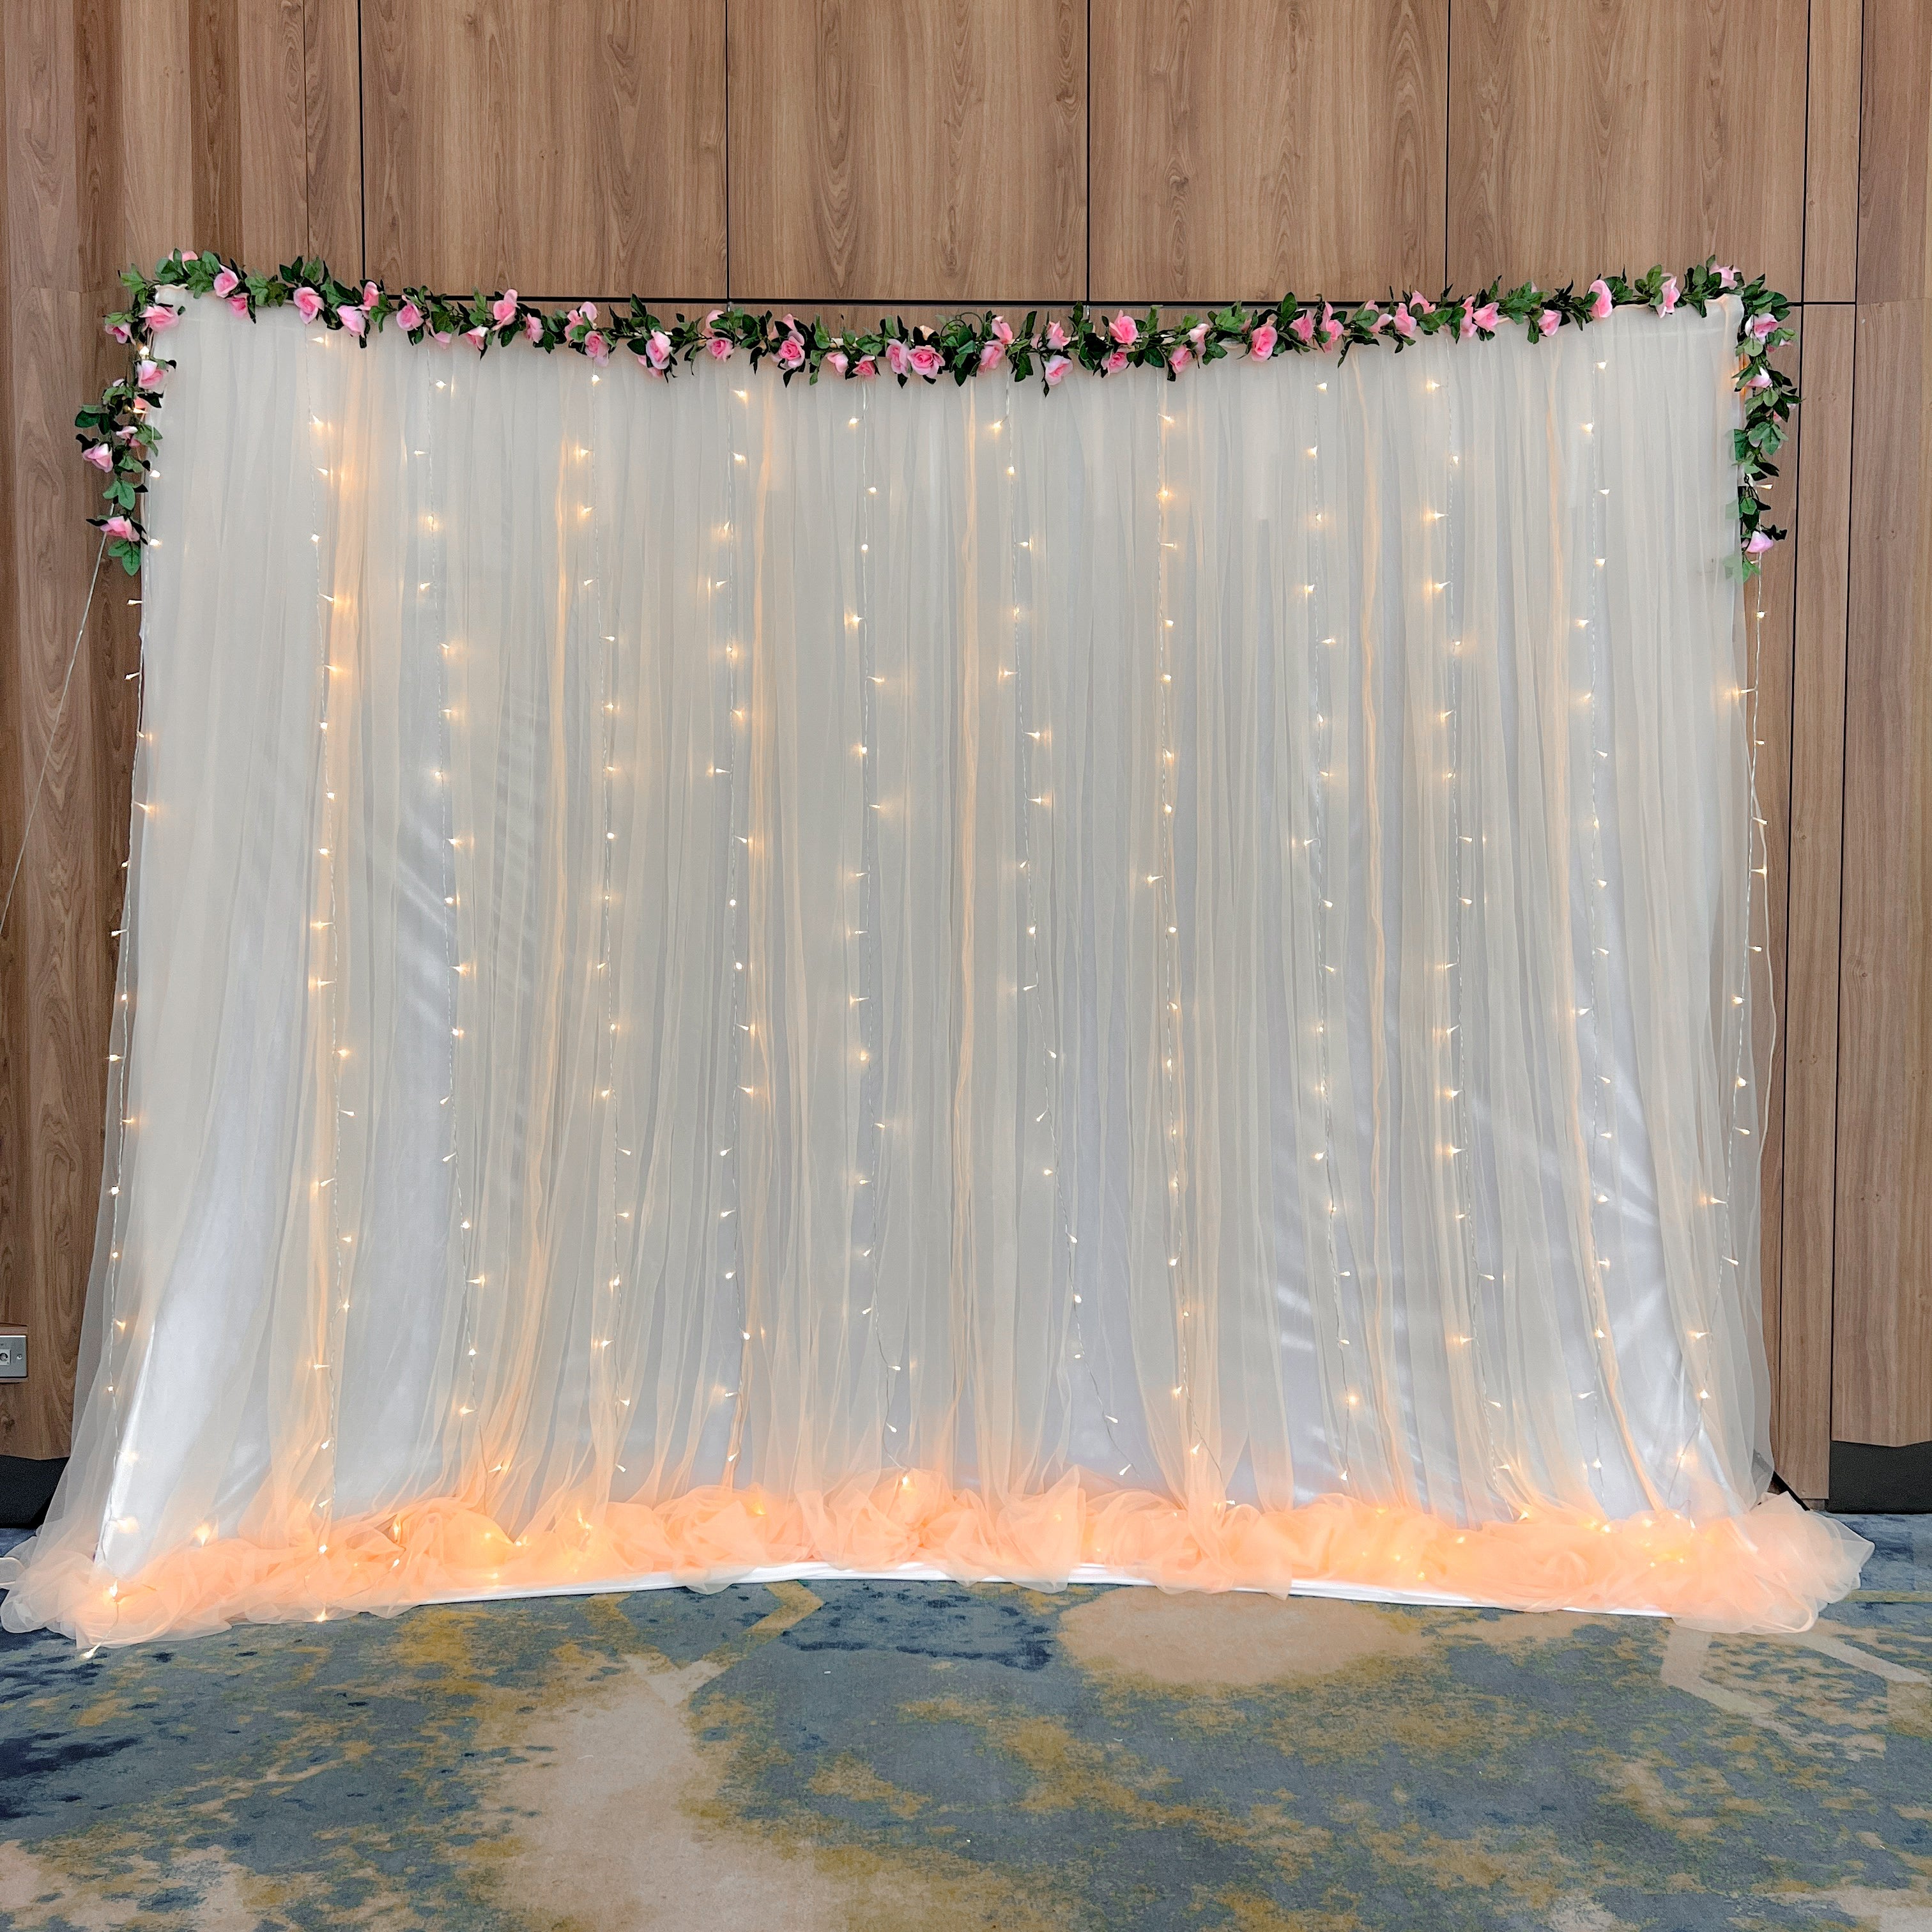  Affordable Wedding/Solemnisation Decor in Singapore - Peach Backdrop with Fairylights & Pink Floral Veins (Venue: Pan Pacific Singapore)